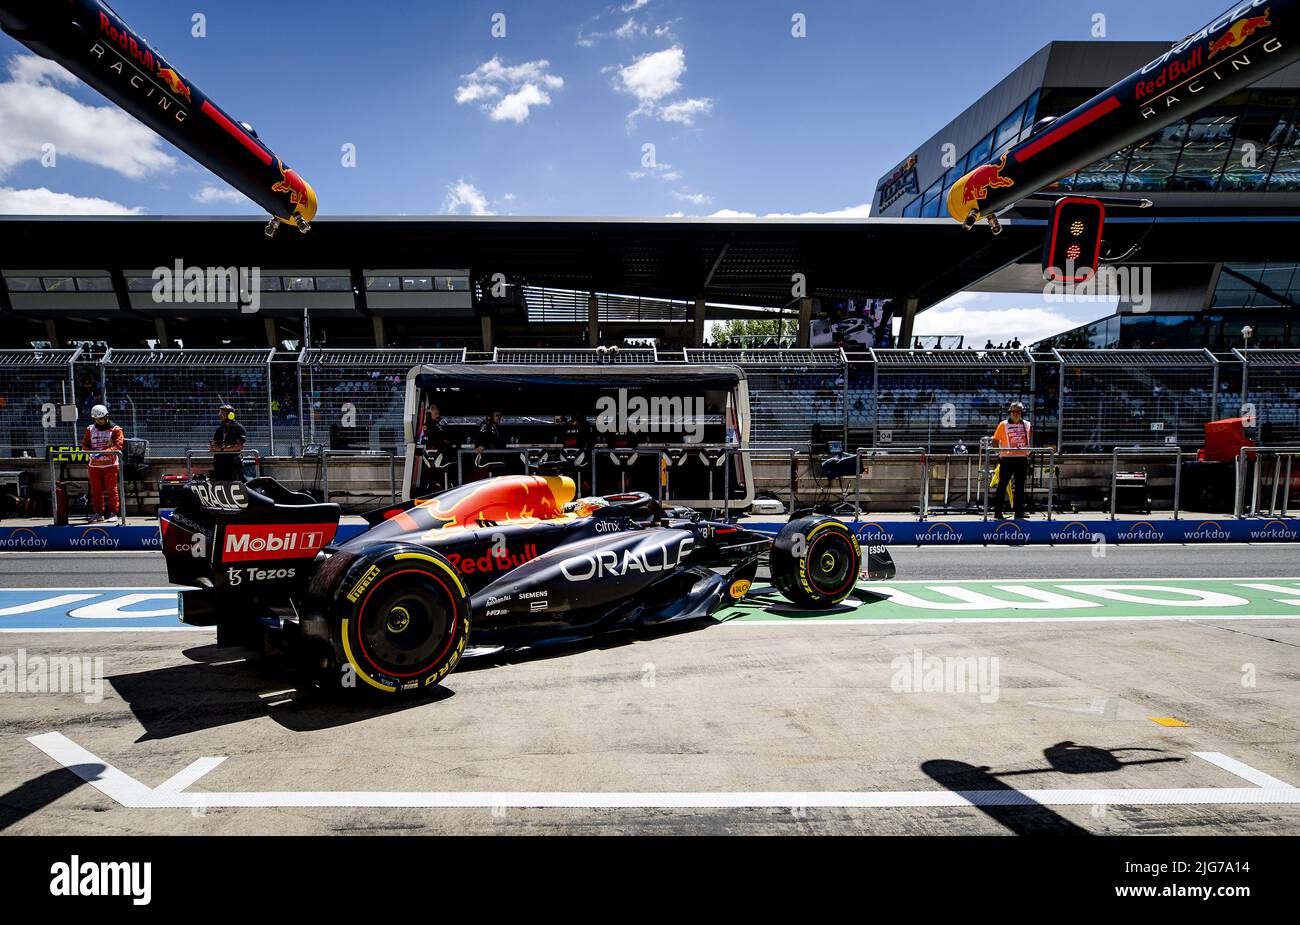 SPIELBERG - Max Verstappen (1) with the Oracle Red Bull Racing RB18 Honda in the pit lane during practice 1 ahead of the F1 Grand Prix of Austria at the Red Bull Ring on July 8, 2022 in Spielberg, Austria. ANP SEM VAN DER WAL Credit: ANP/Alamy Live News Stock Photo